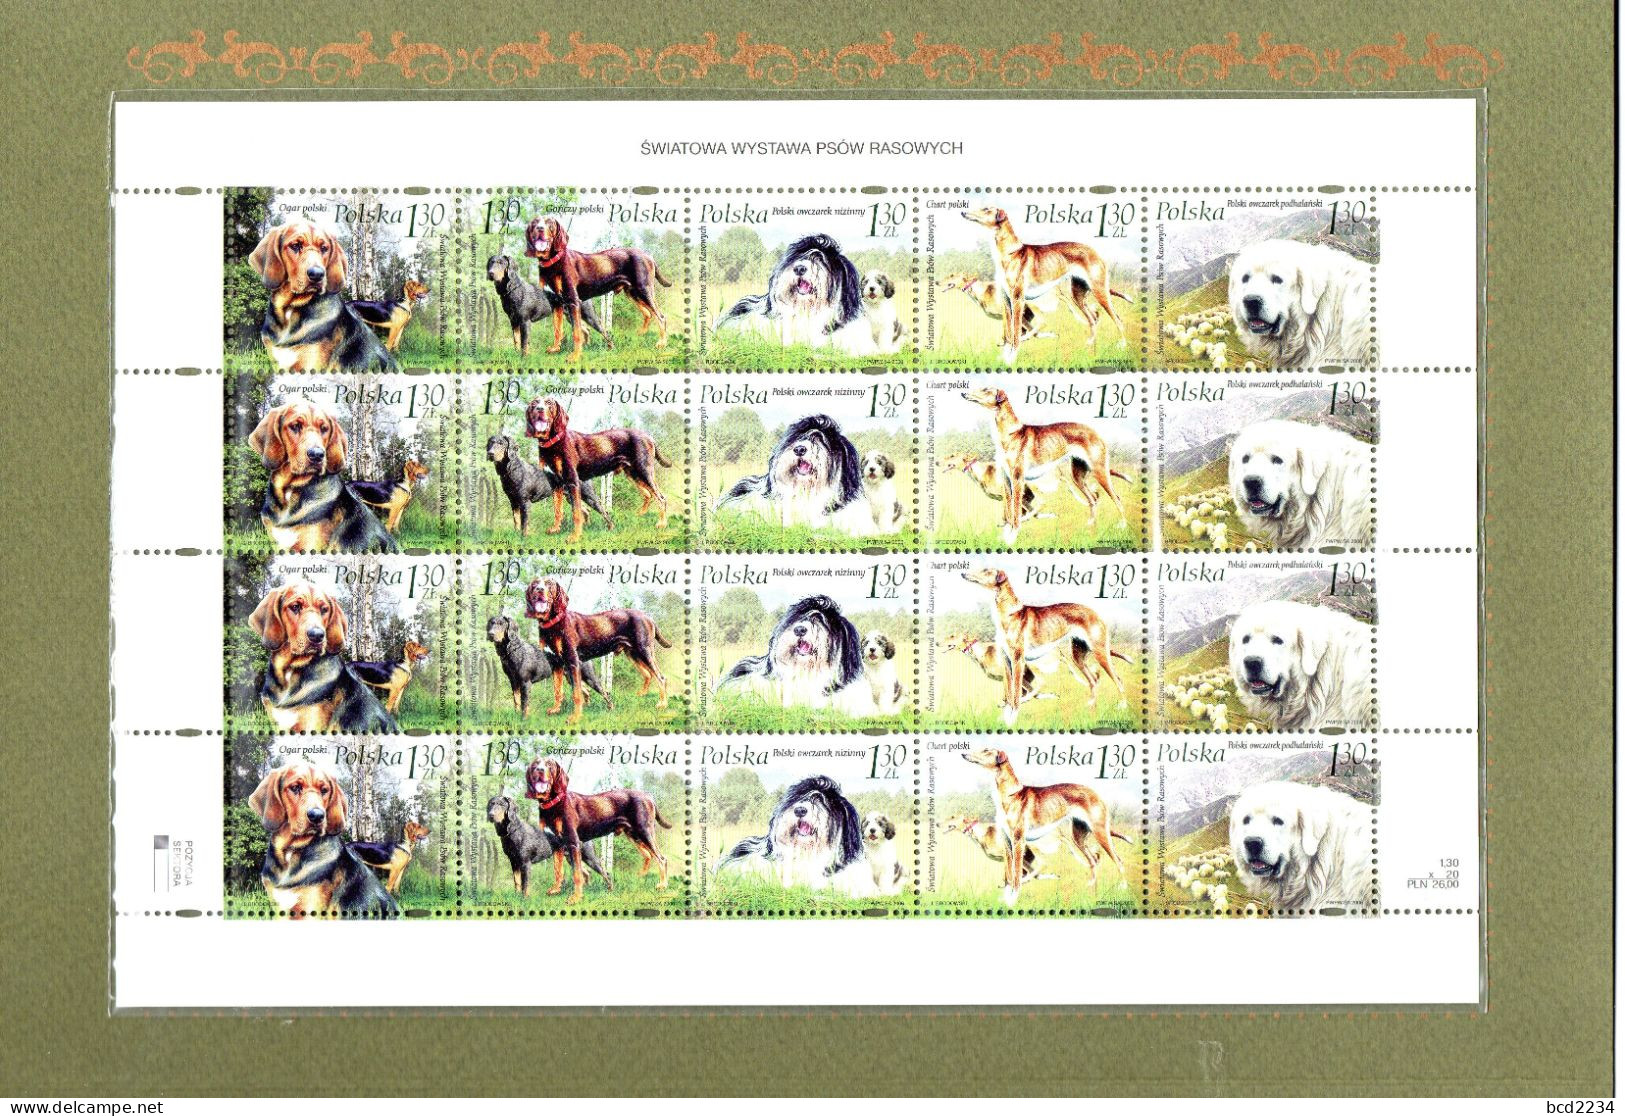 POLAND 2006 RARE POLISH POST OFFICE LIMITED EDITION FOLDER: SHEET OF 20 STAMPS OF WORLD EXHIBITION SHOW PEDIGREE DOGS - Storia Postale